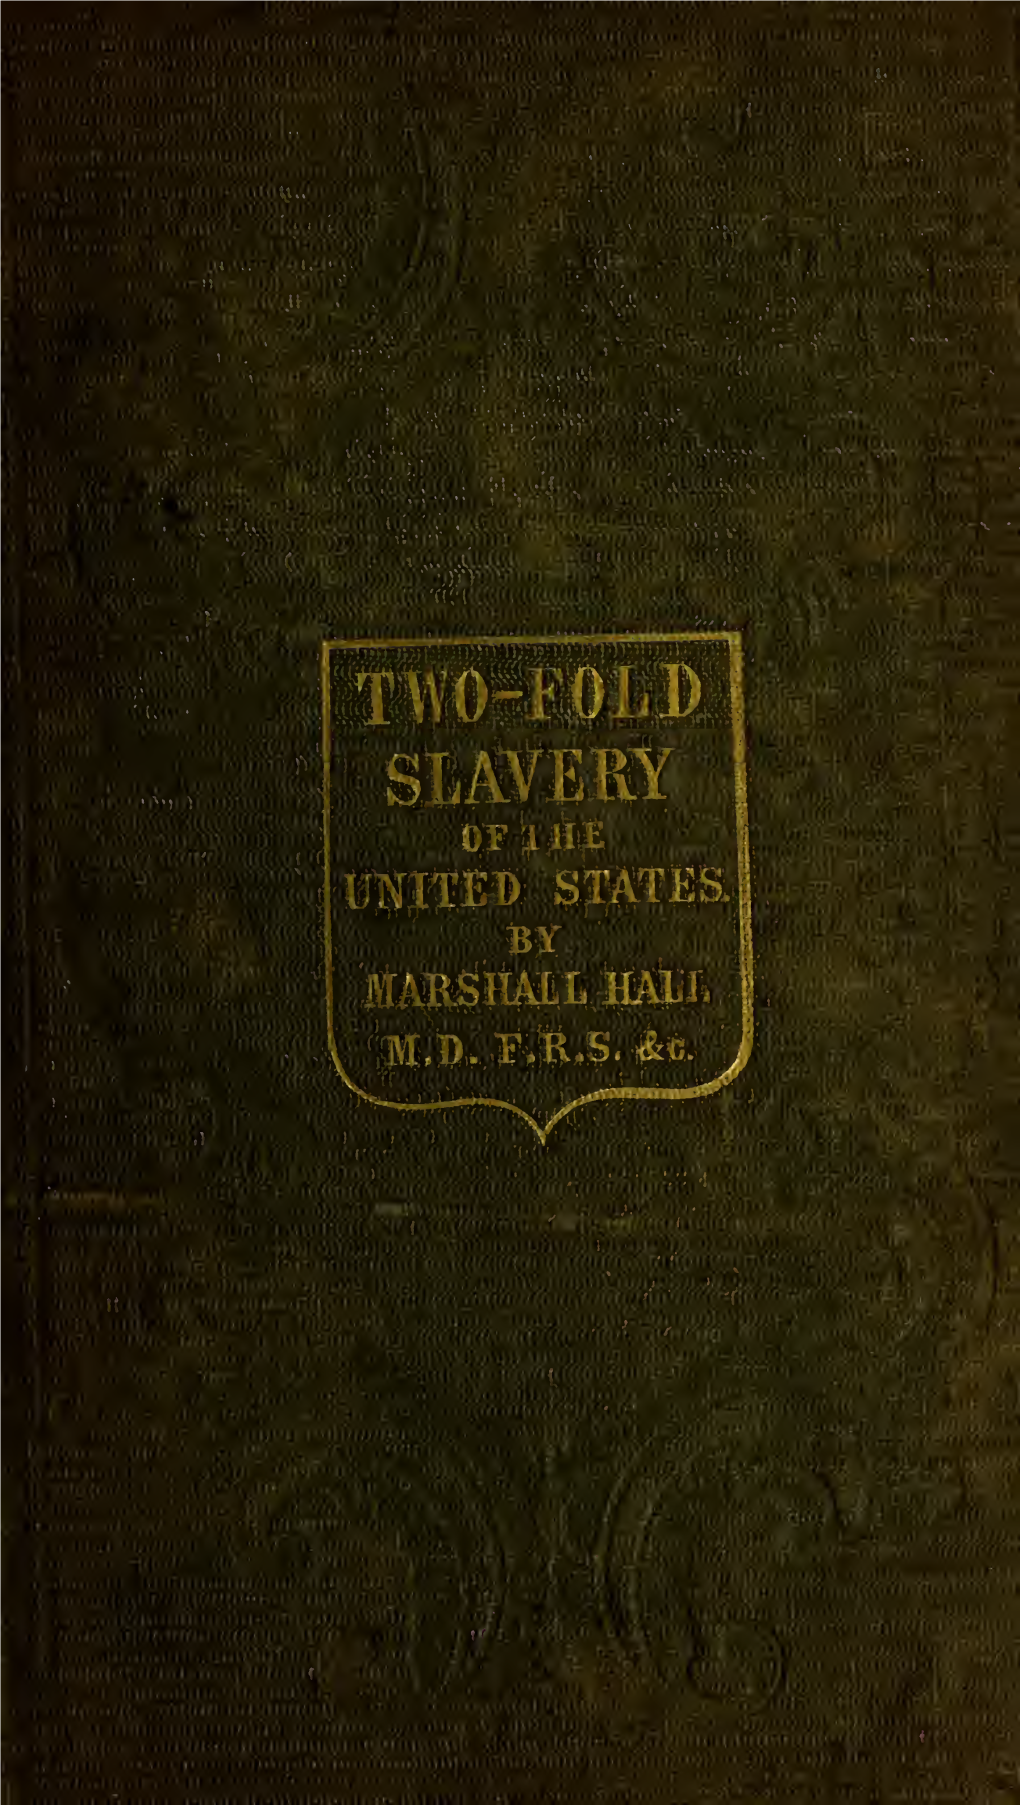 The Two-Fold Slavery of the United States